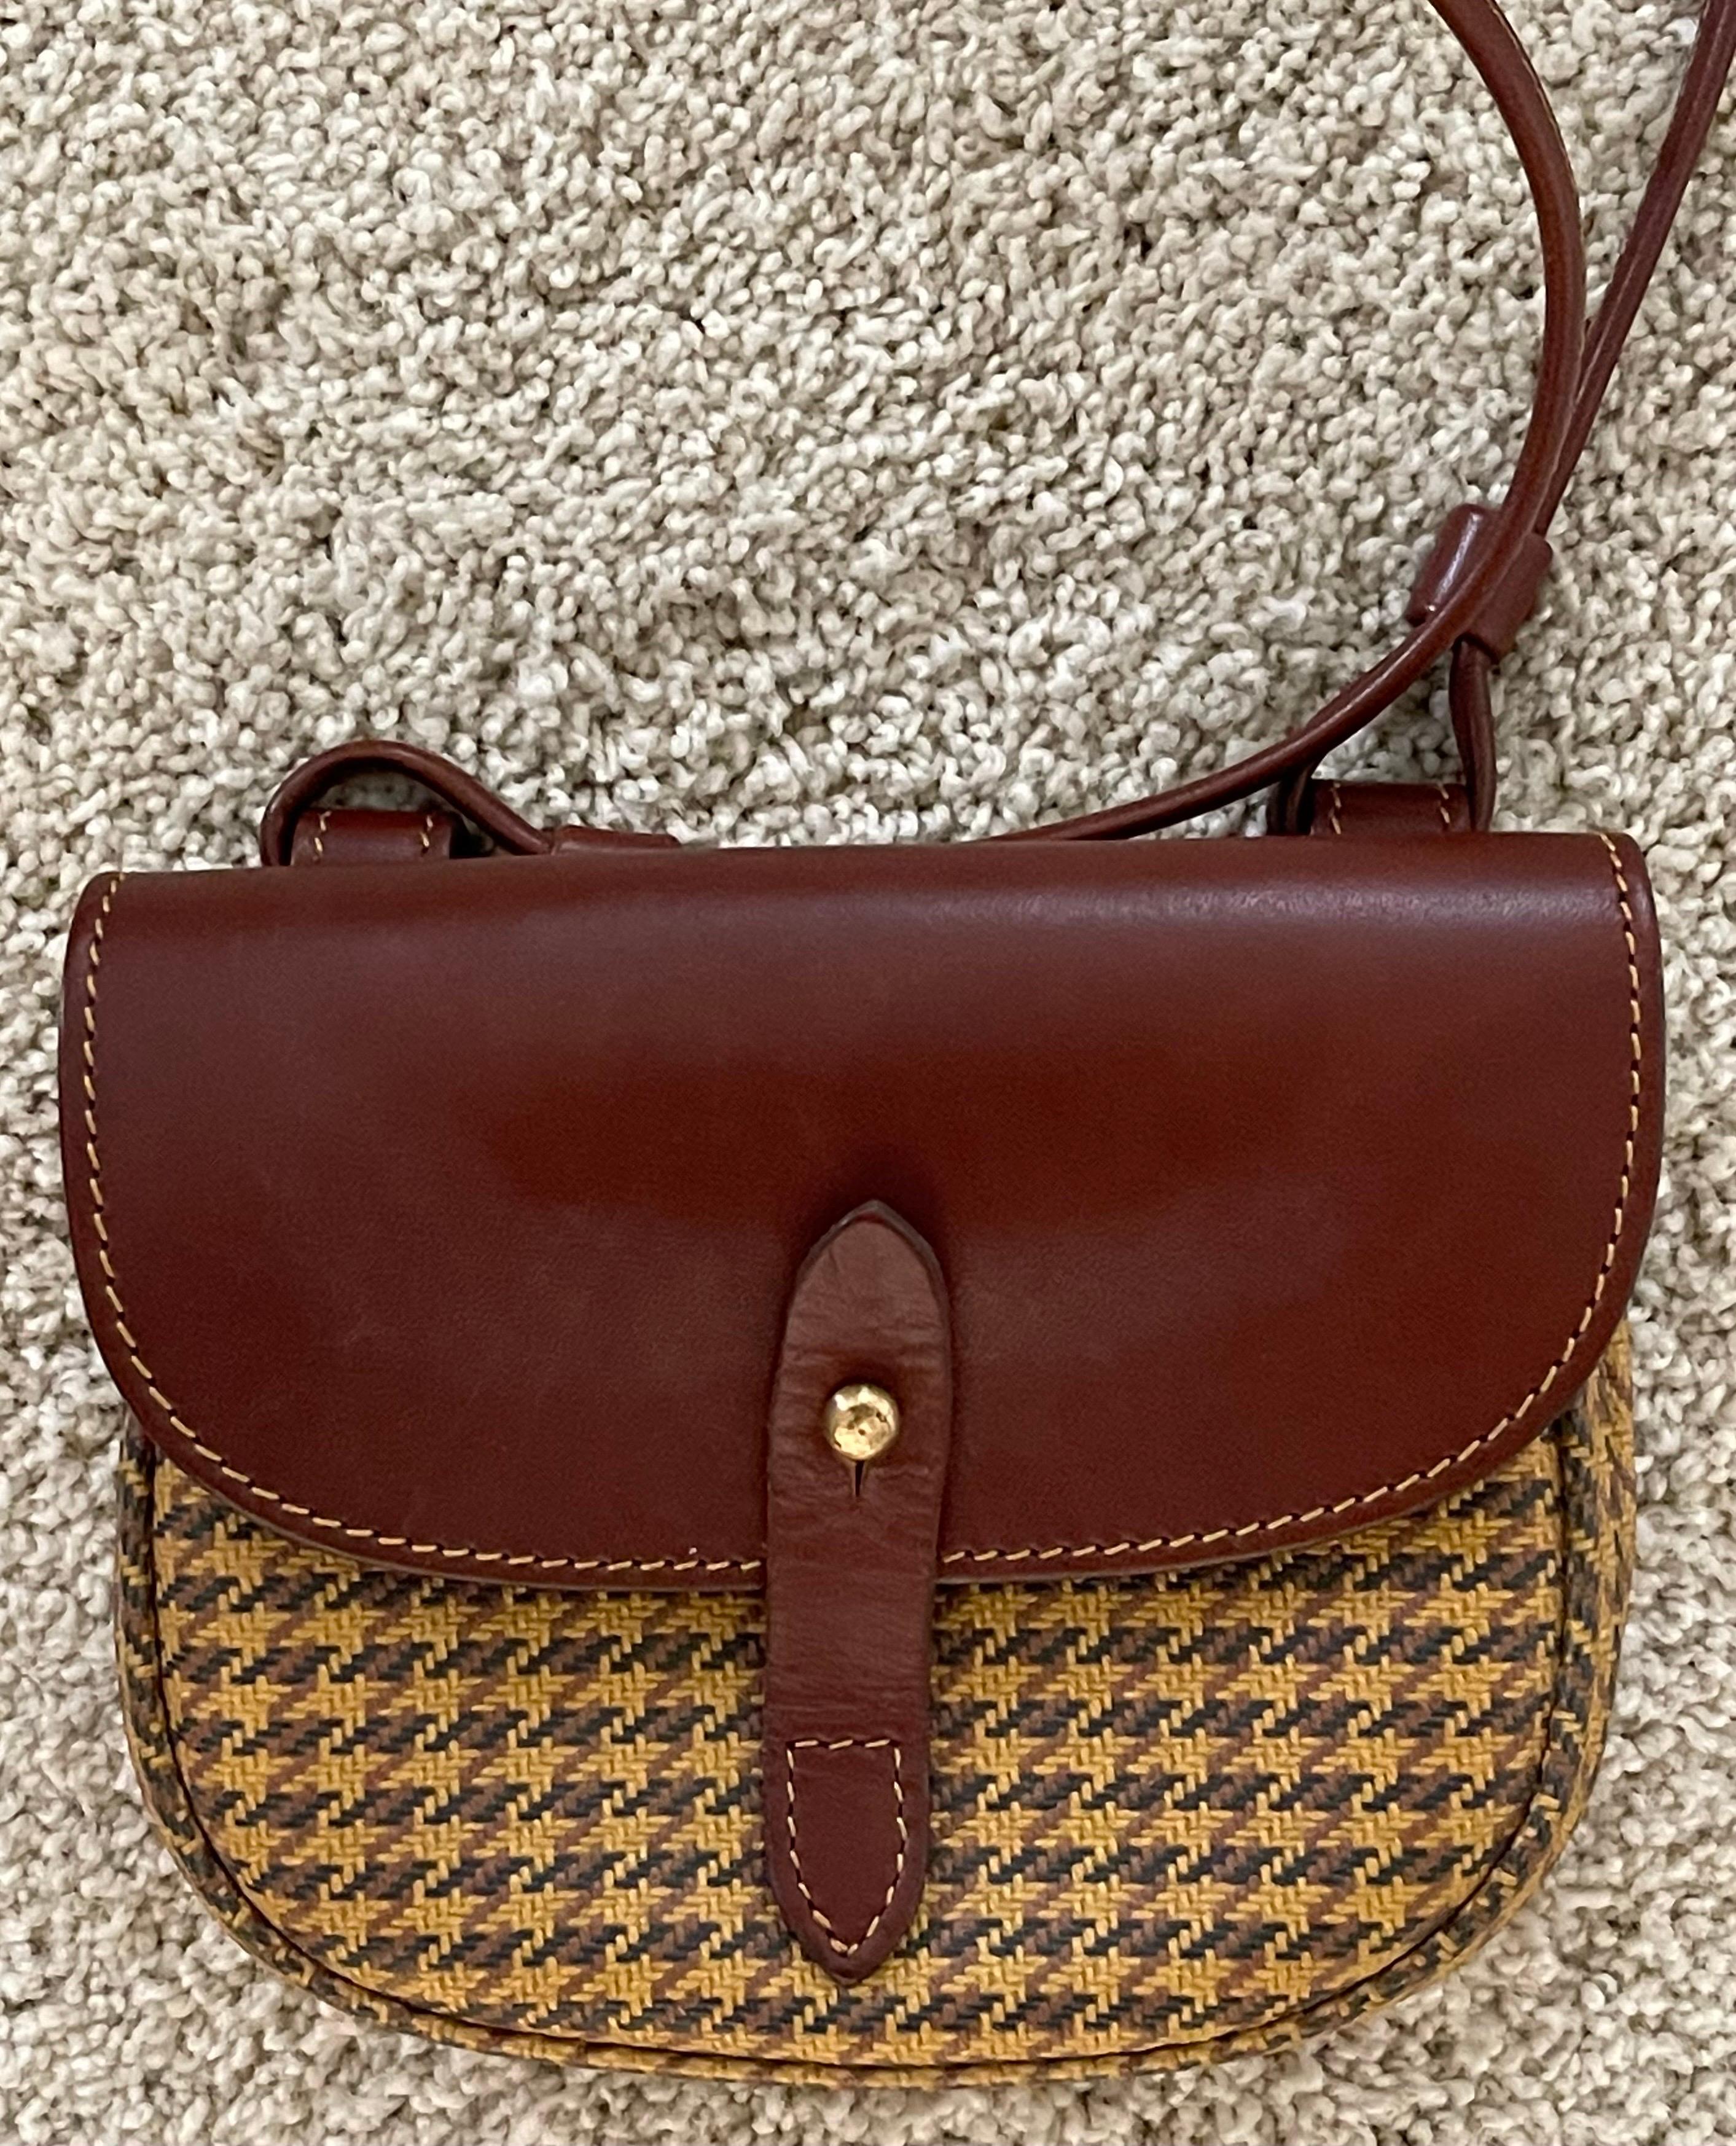 Small Cartridge Houndstooth Shoulder Bag by Marley Hodgson for Ghurka In Good Condition For Sale In San Diego, CA